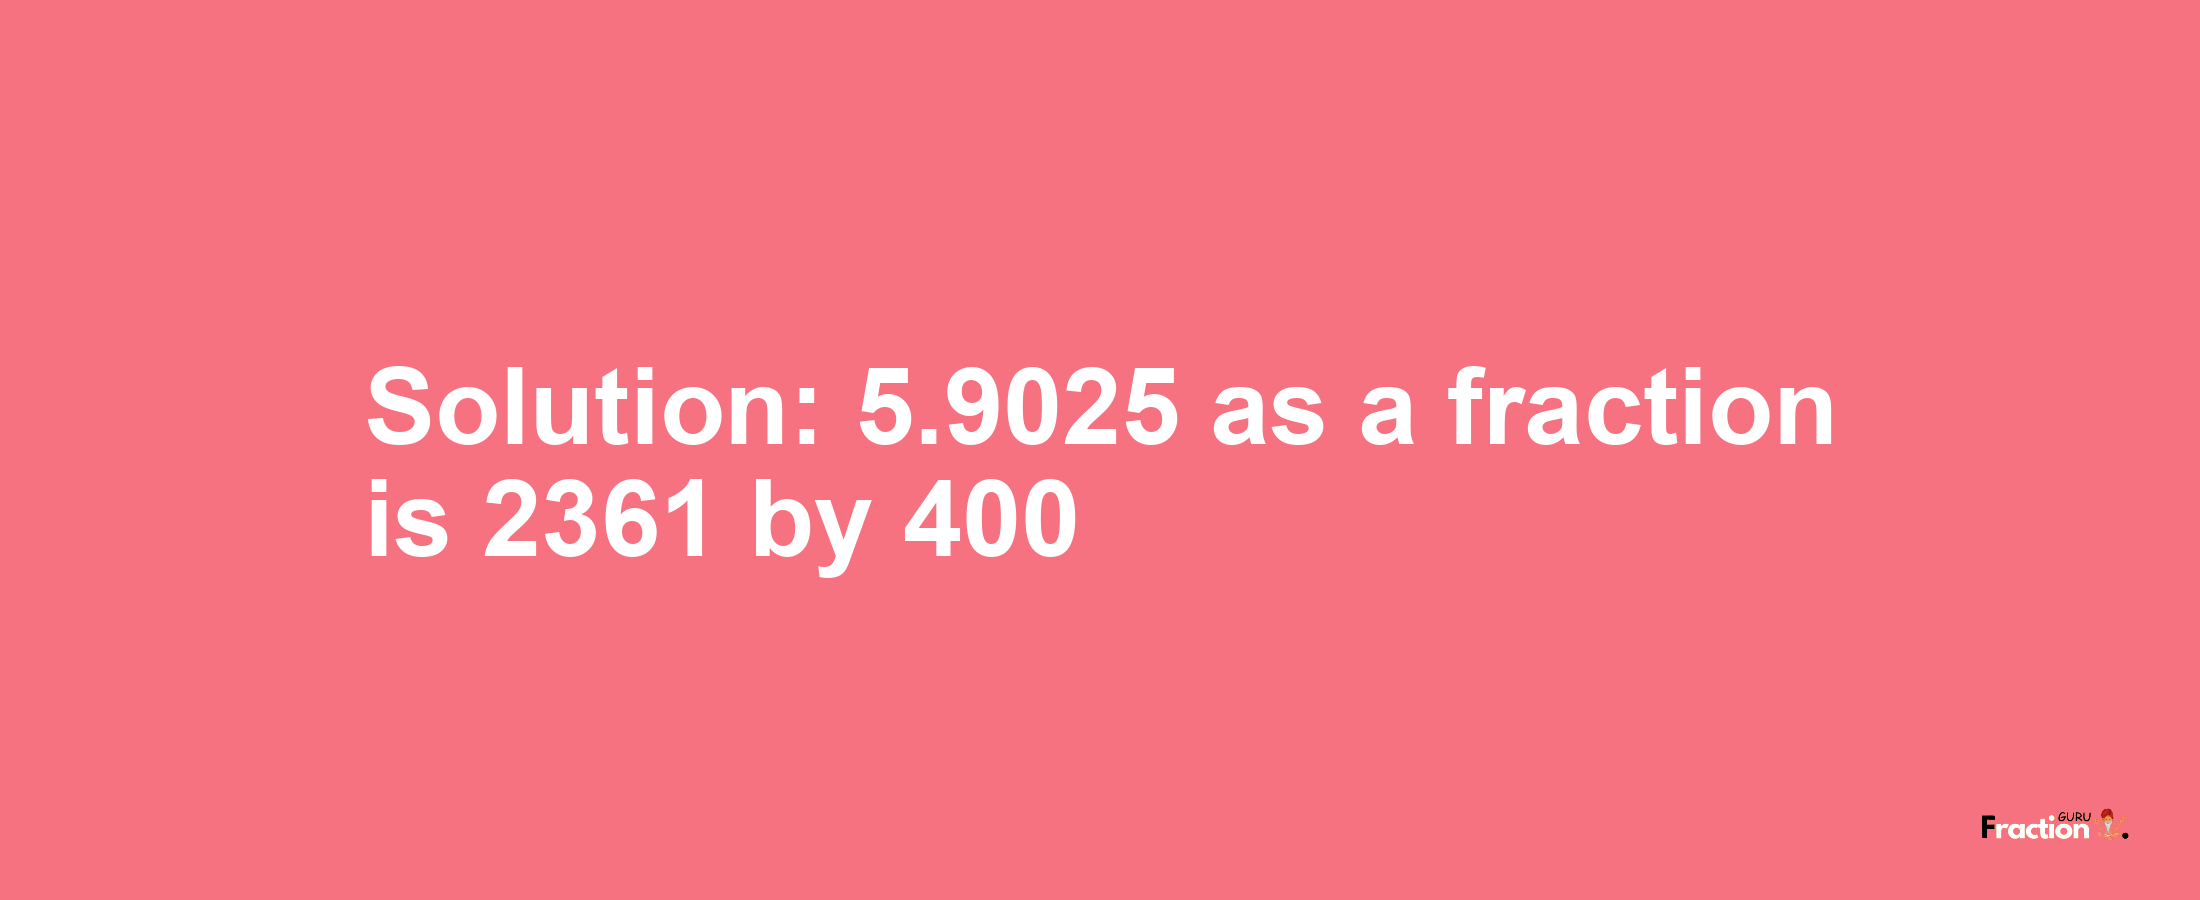 Solution:5.9025 as a fraction is 2361/400